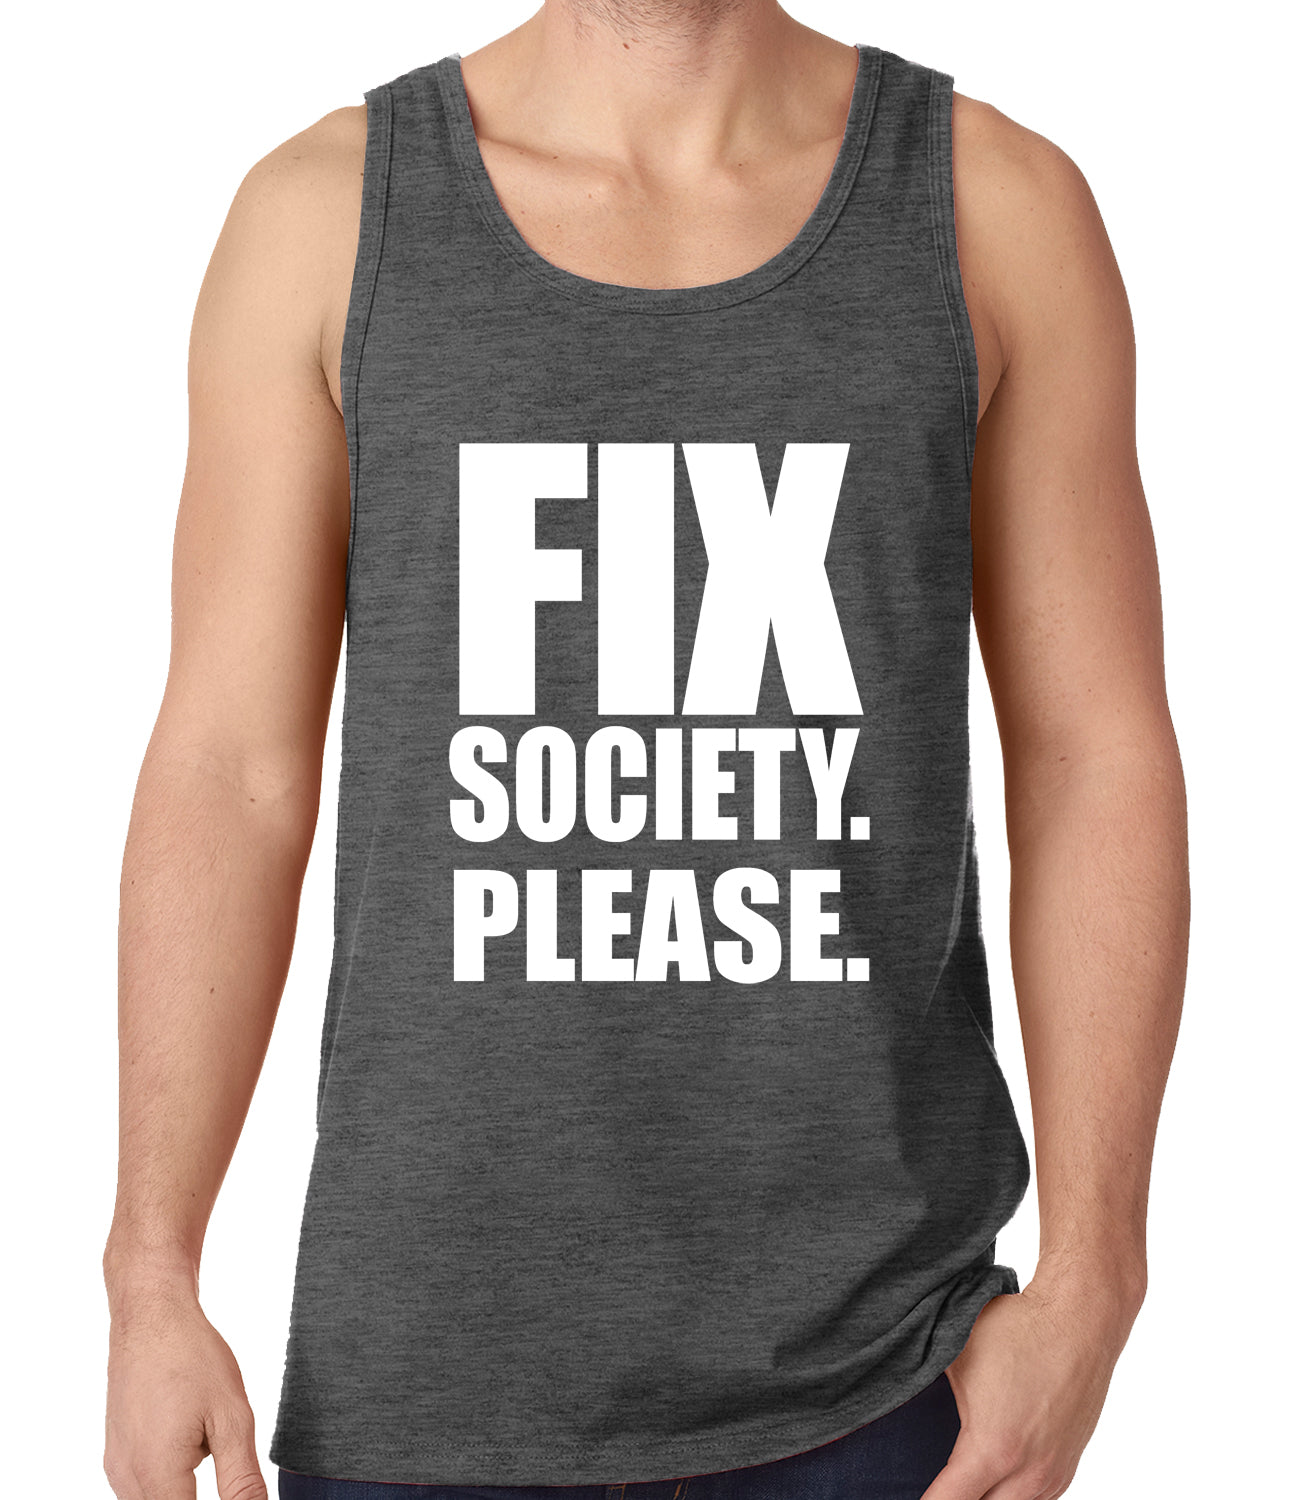 Fix Society. Please. Transgender Equality Tank Top